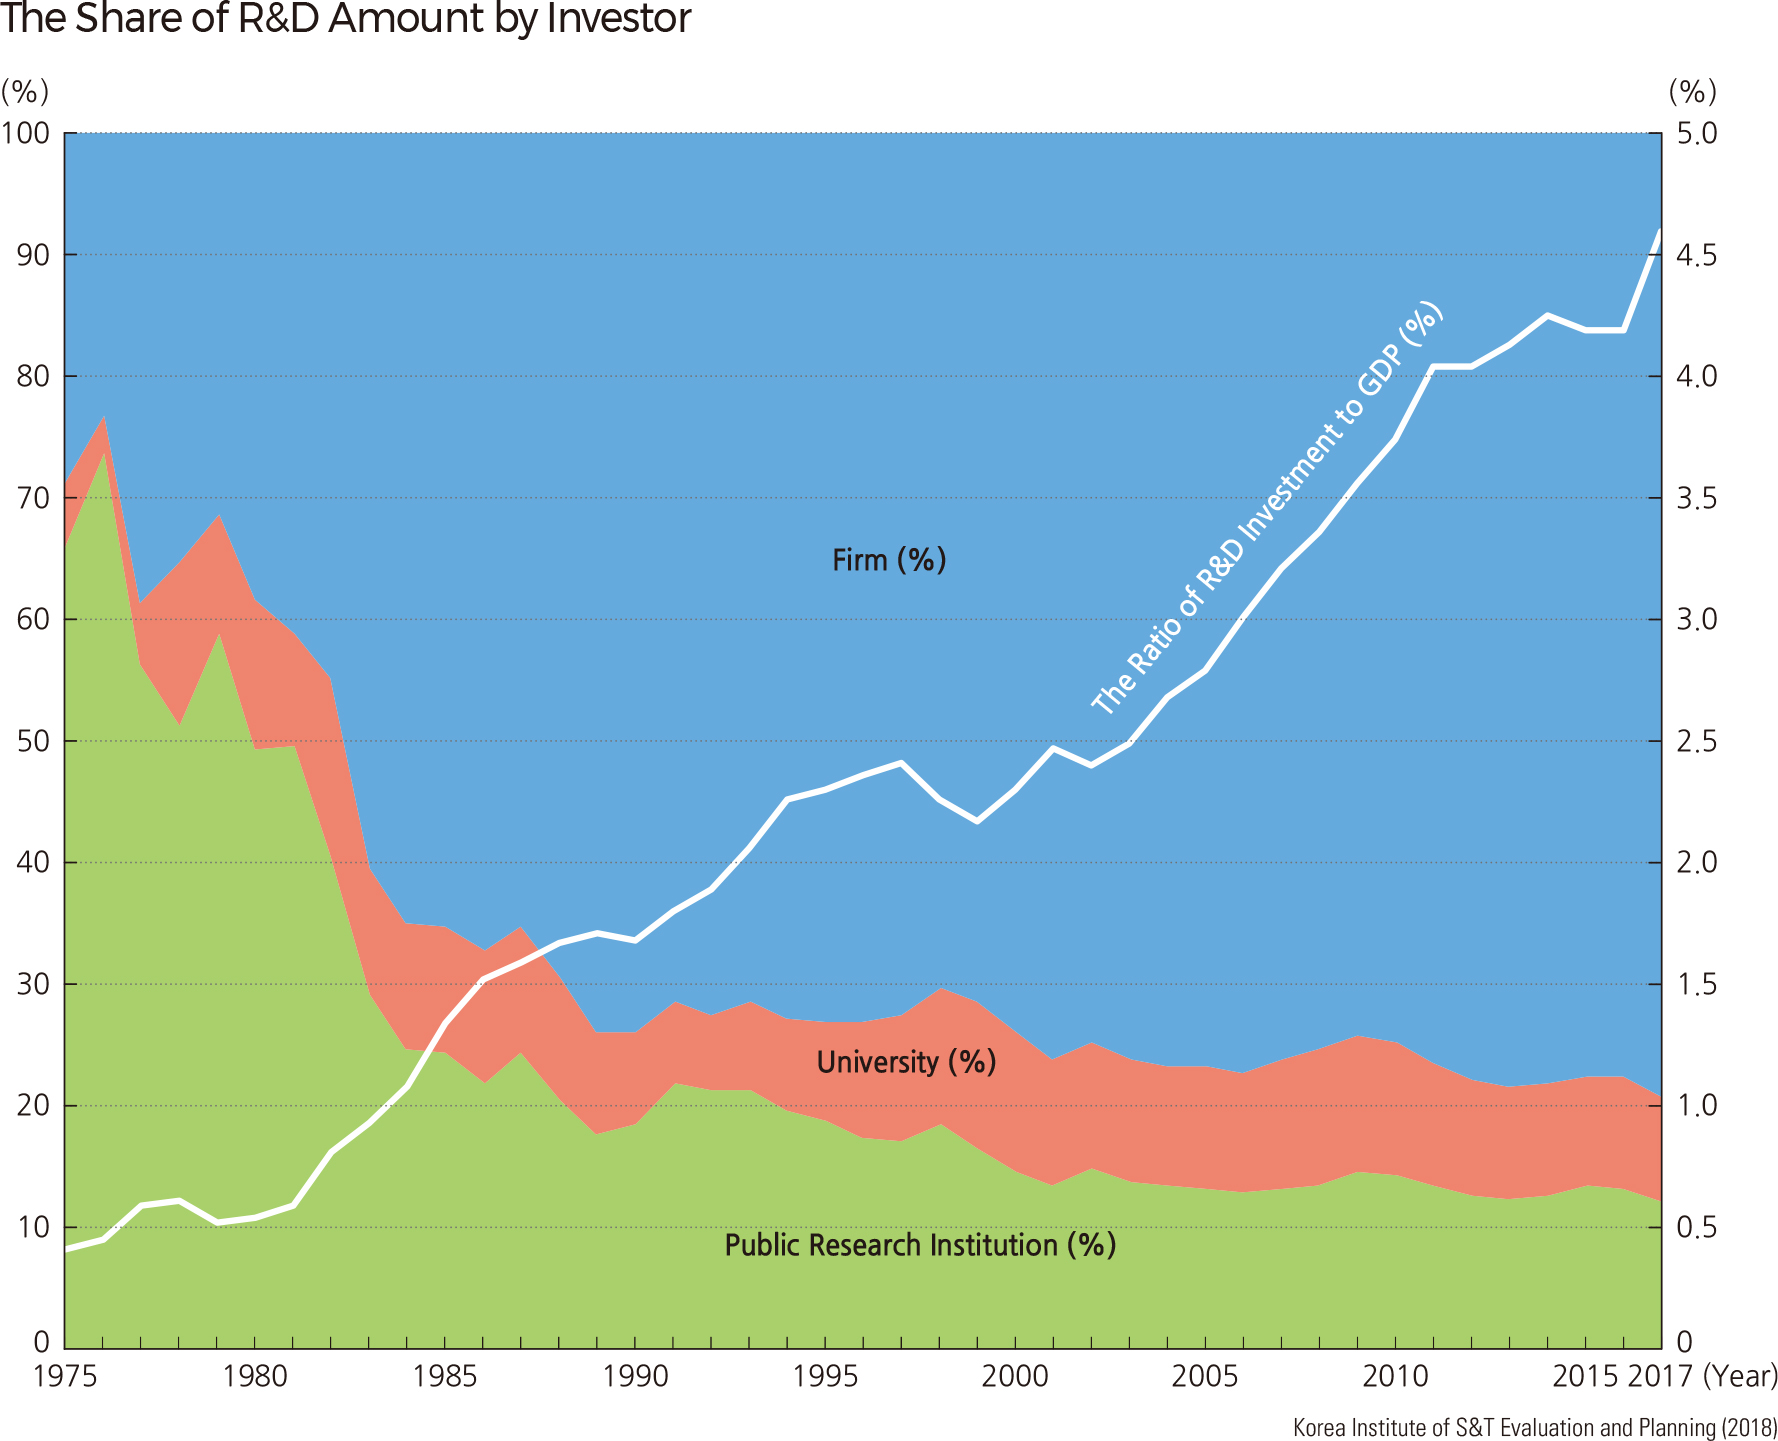 The Share of R&D Amount by Investor